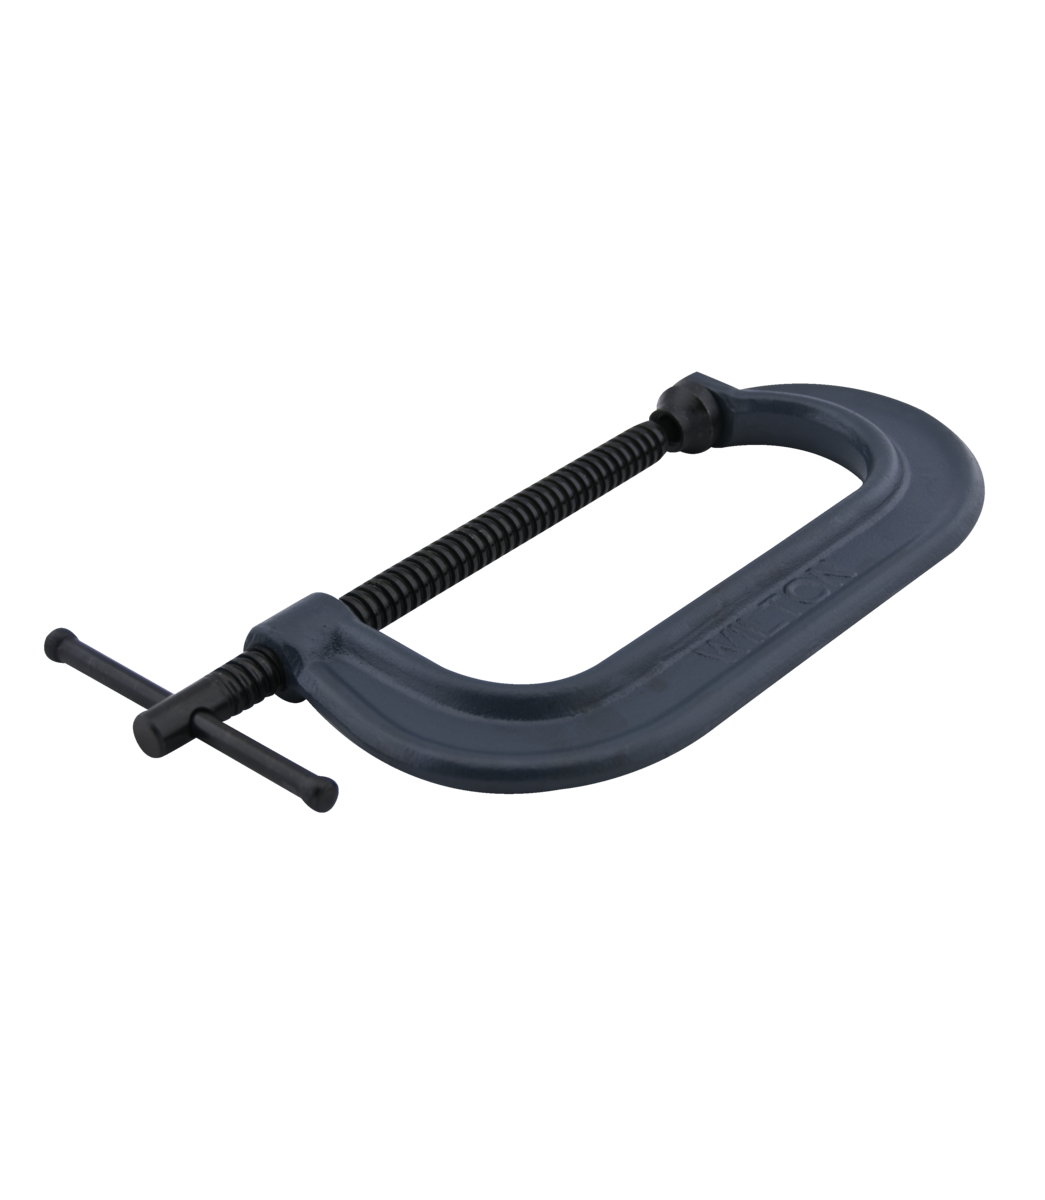 WILTON 800 Series Standard Depth Drop Forged C-Clamp, 0 - 8” Opening, 3-7/16” Throat